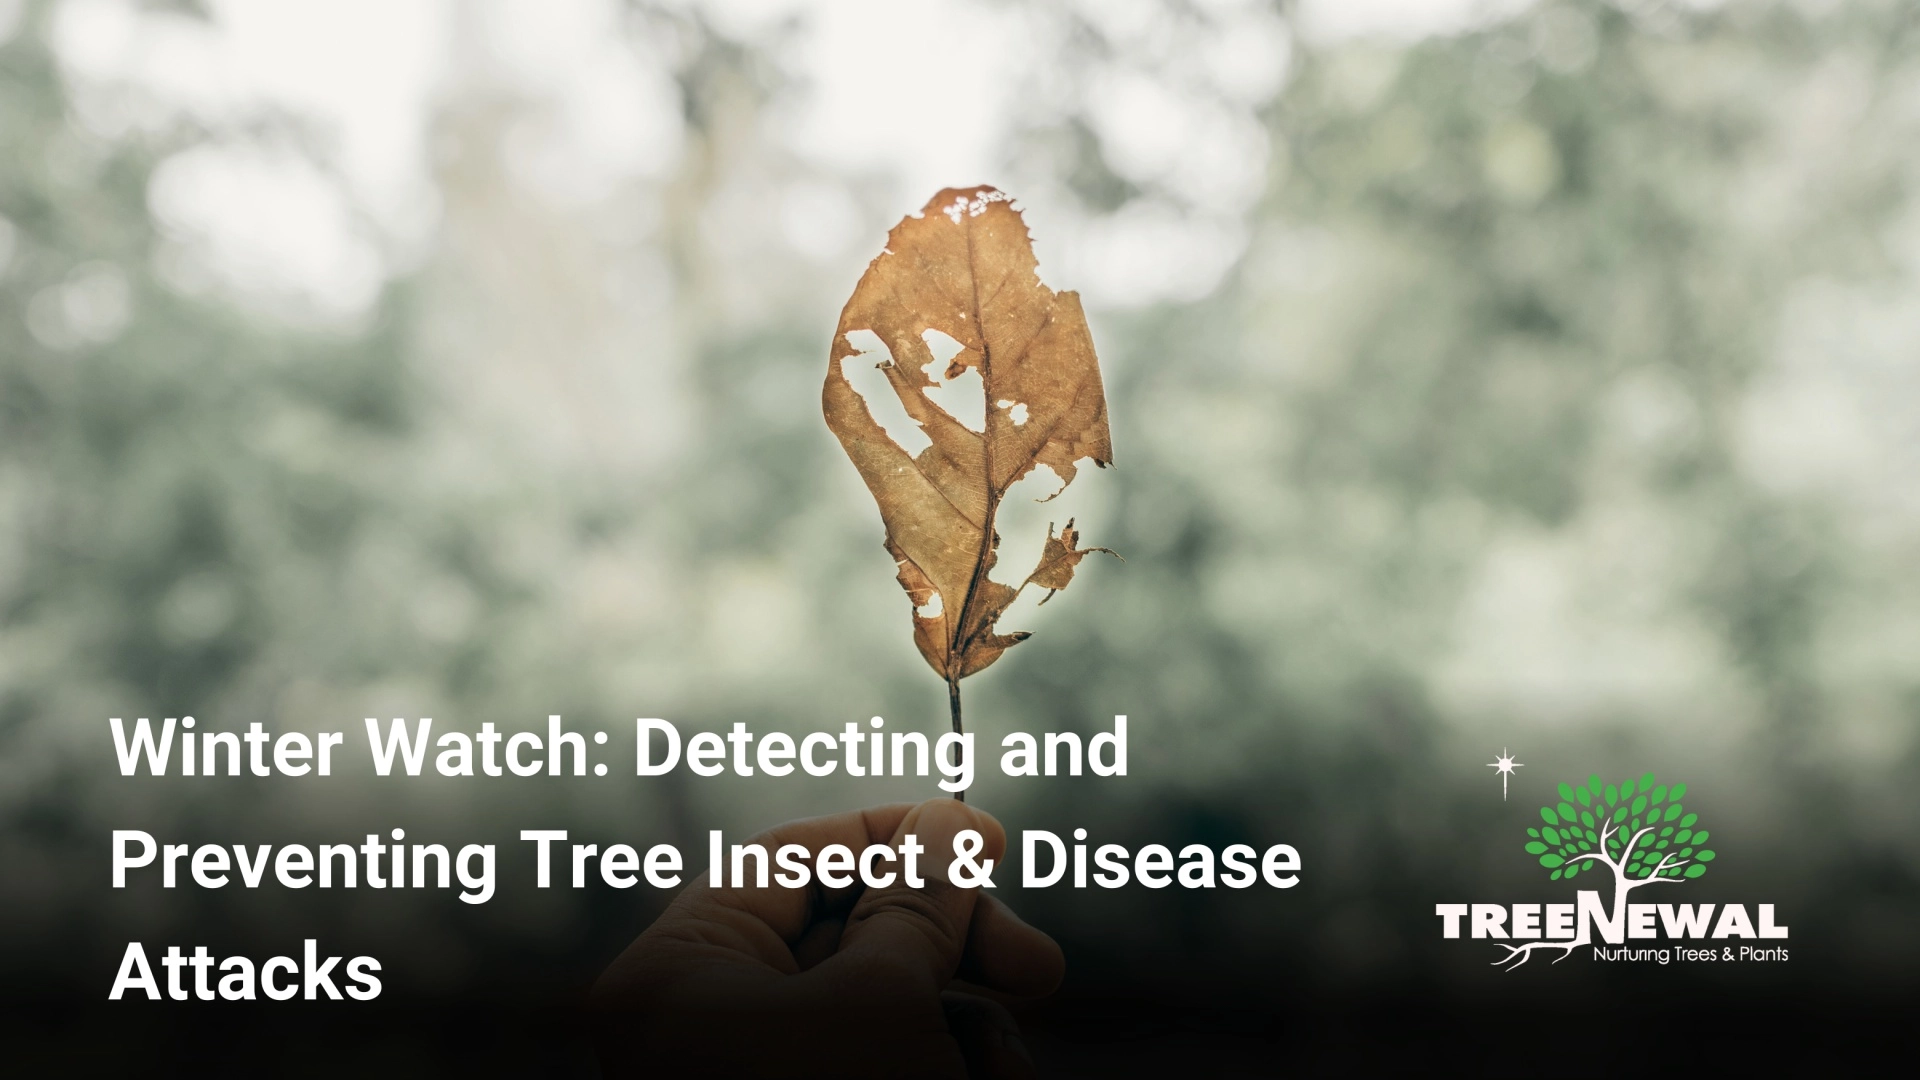 Winter Watch: Detecting and Preventing Tree Insect & Disease Attacks